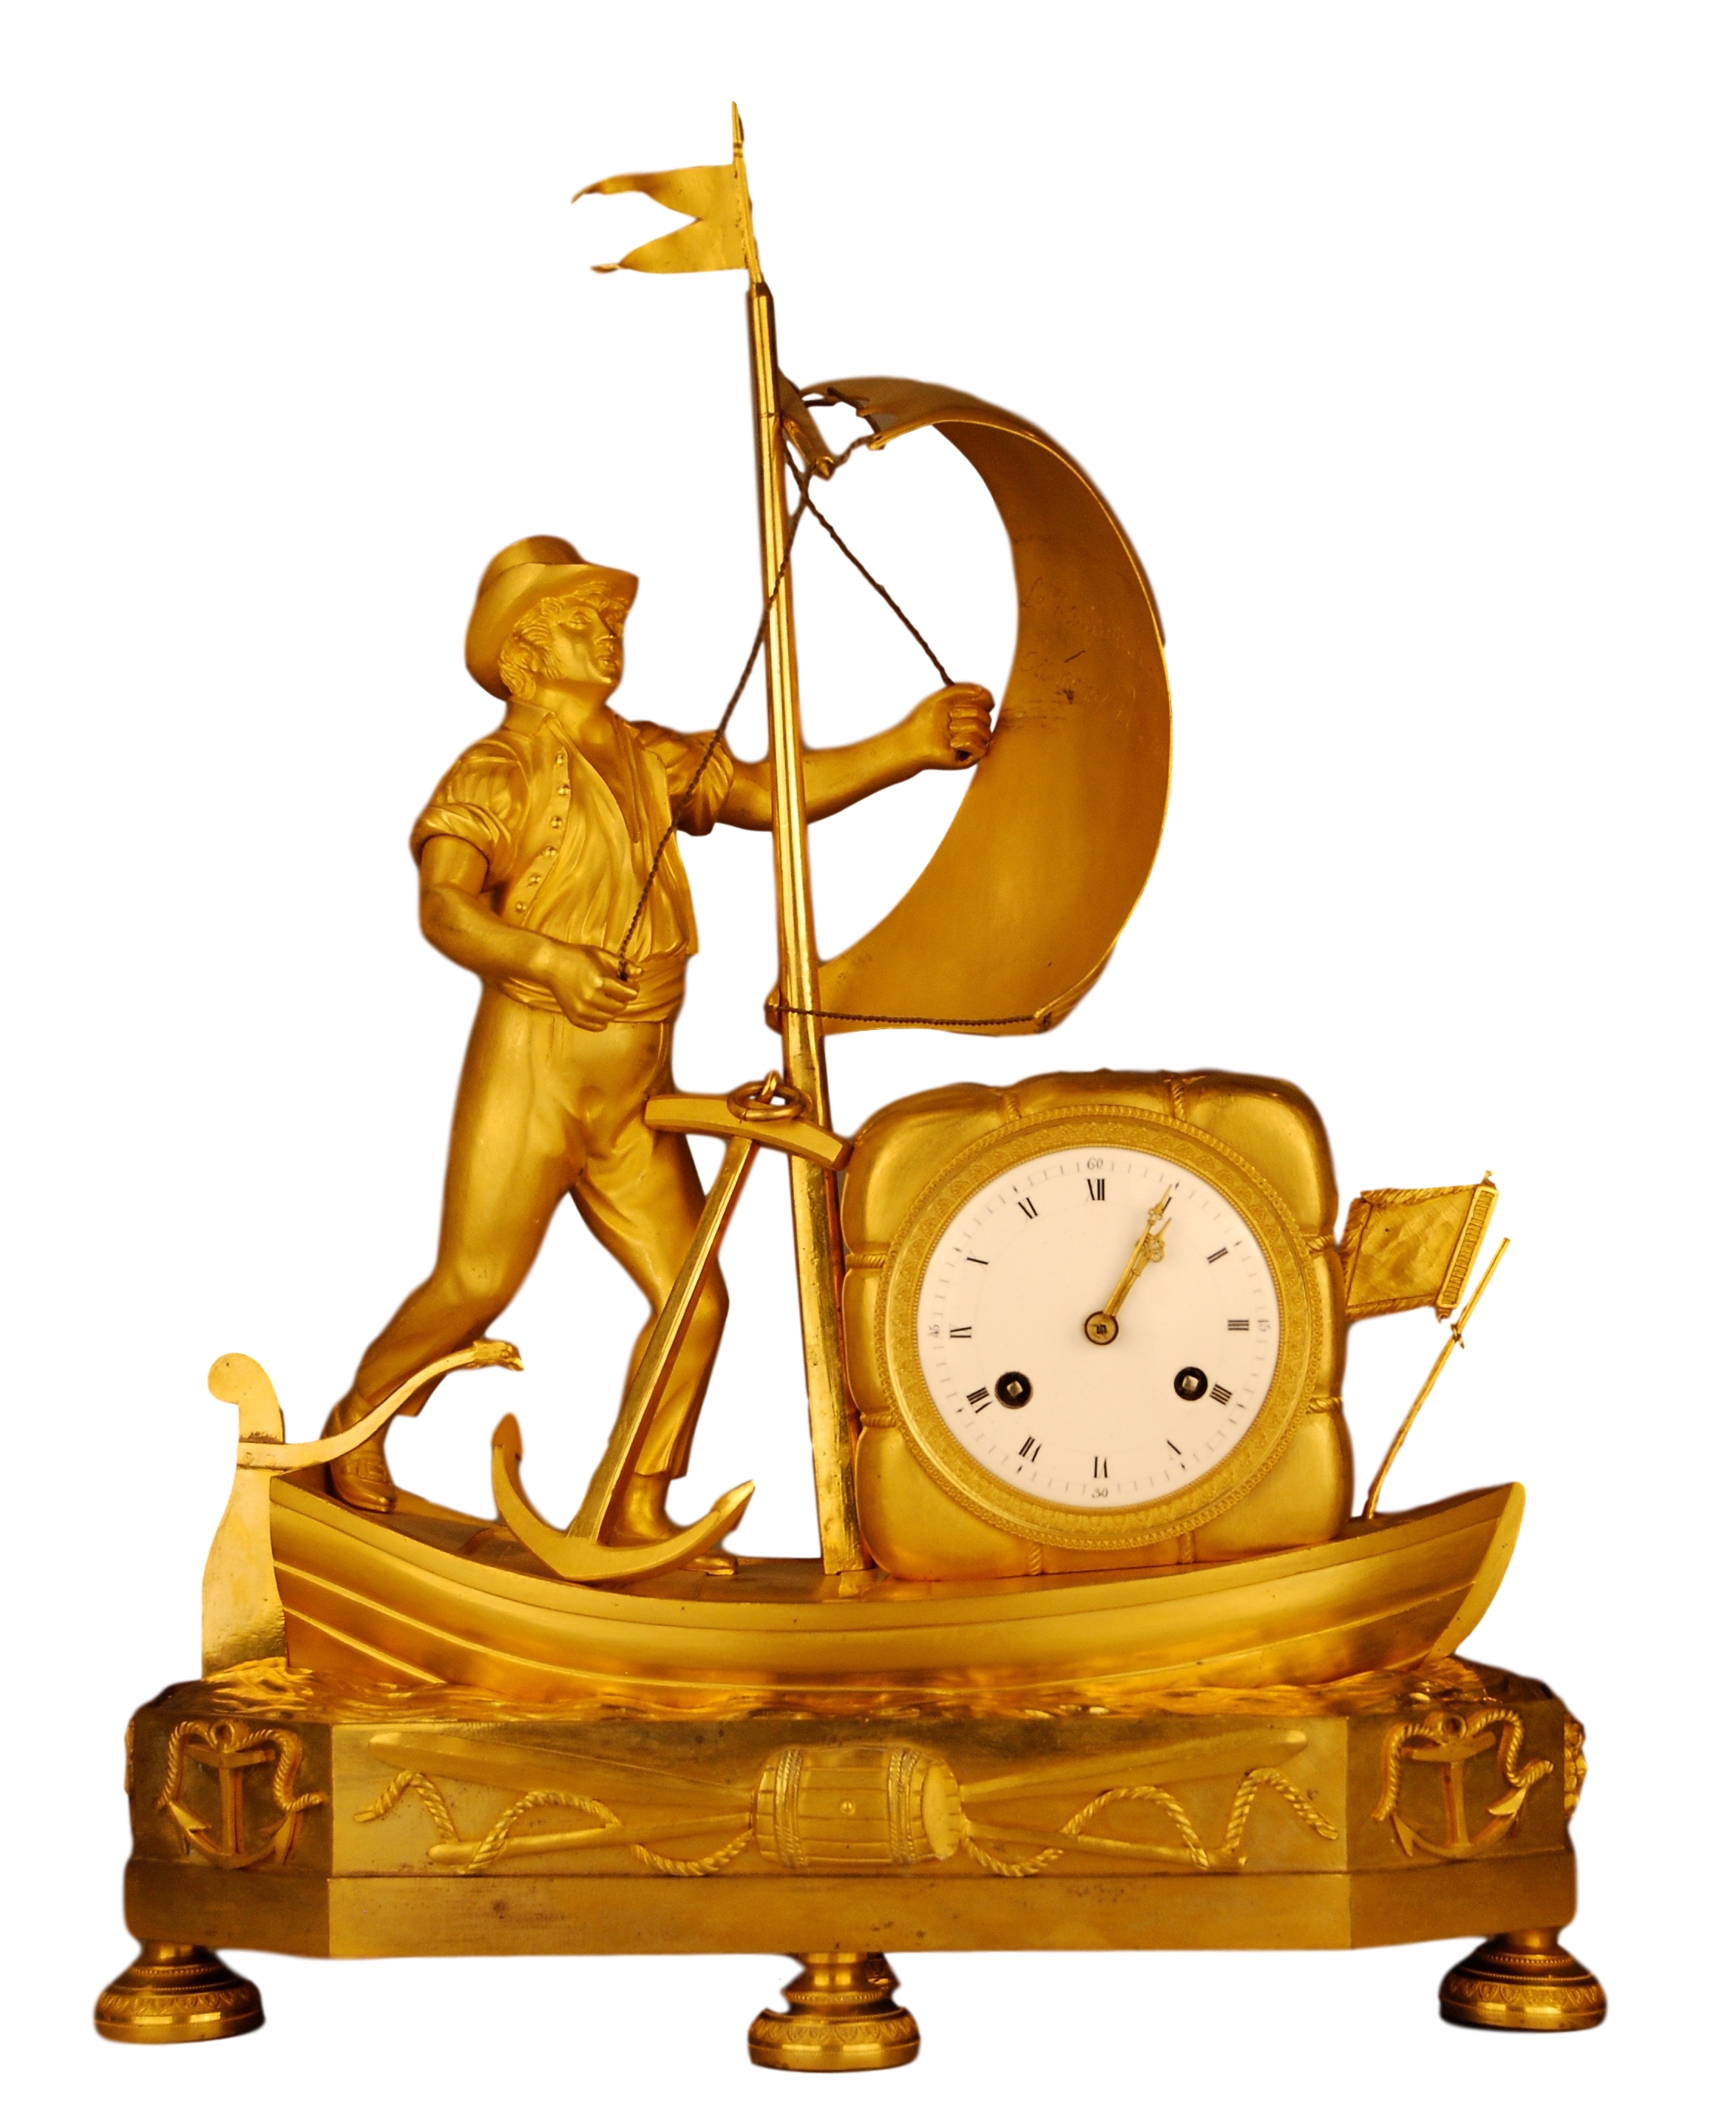 This antique gilt French Empire clock is from the rare group of clocks known as 'genre clocks' that often depicted everyday and amusing scenes from life and folklore.